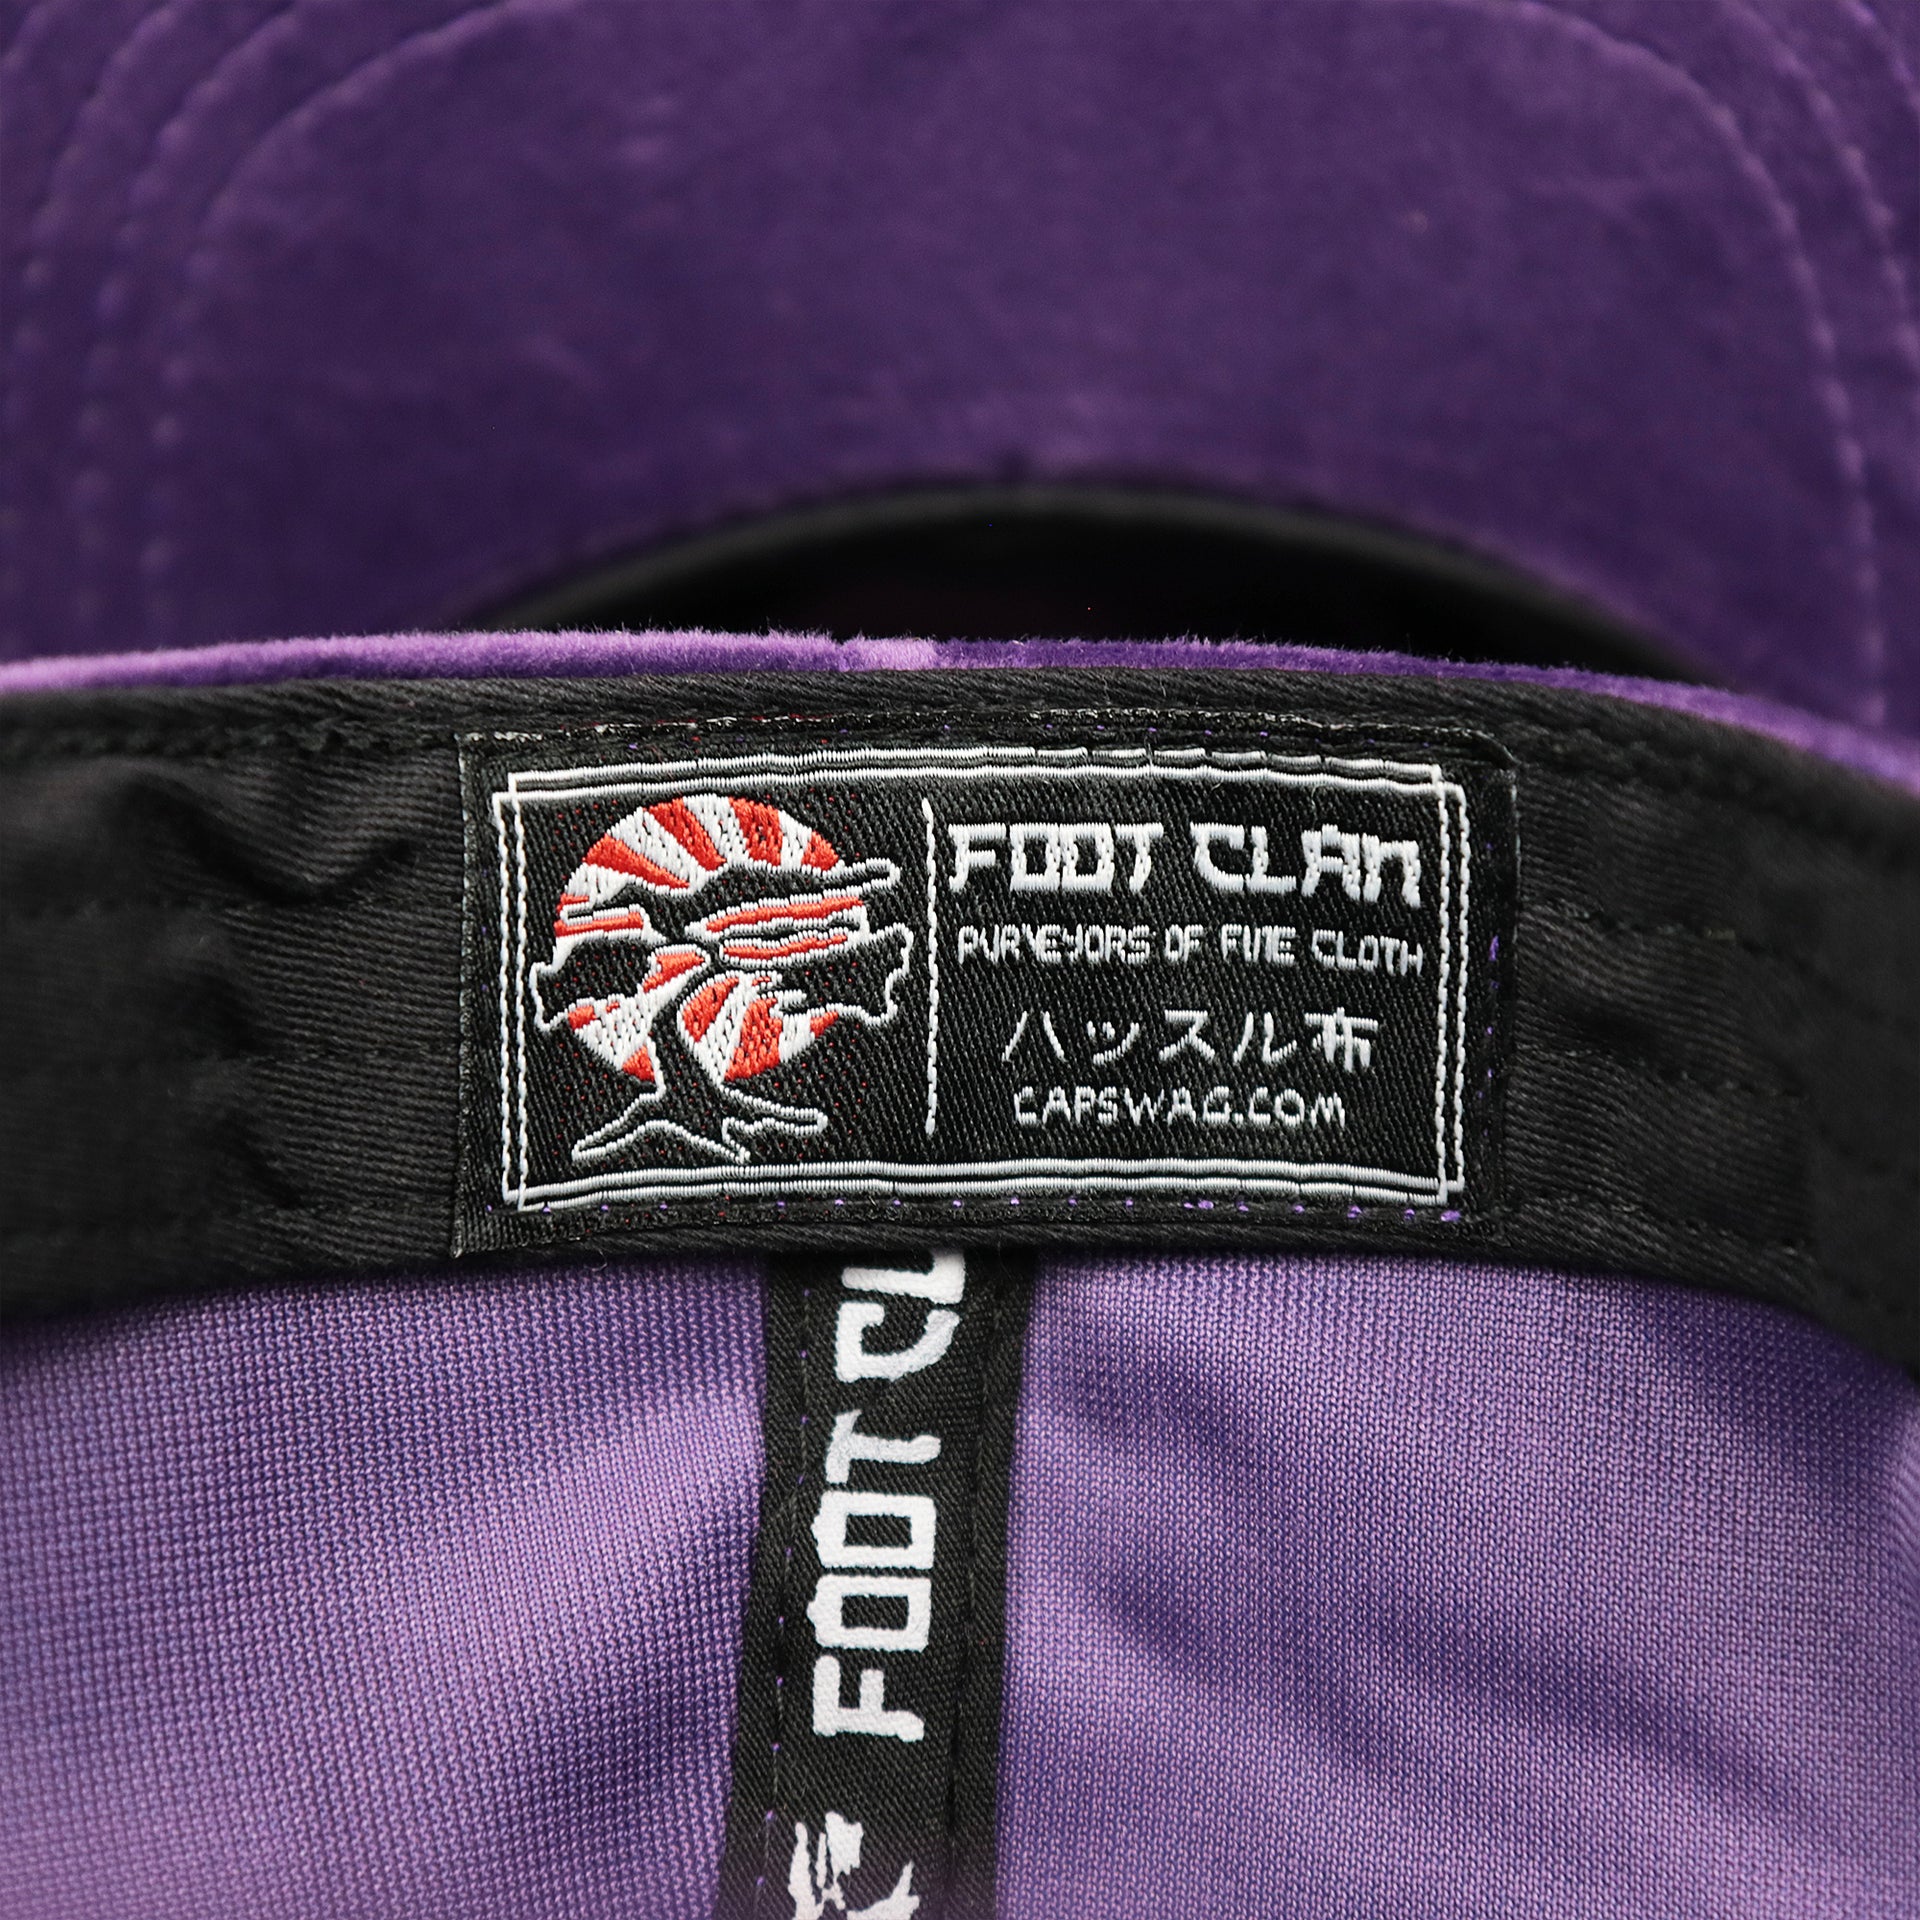 The Foot Clan Tag on the Velour Blank Concord Grape Snapback Cap | Purple Snap Cap